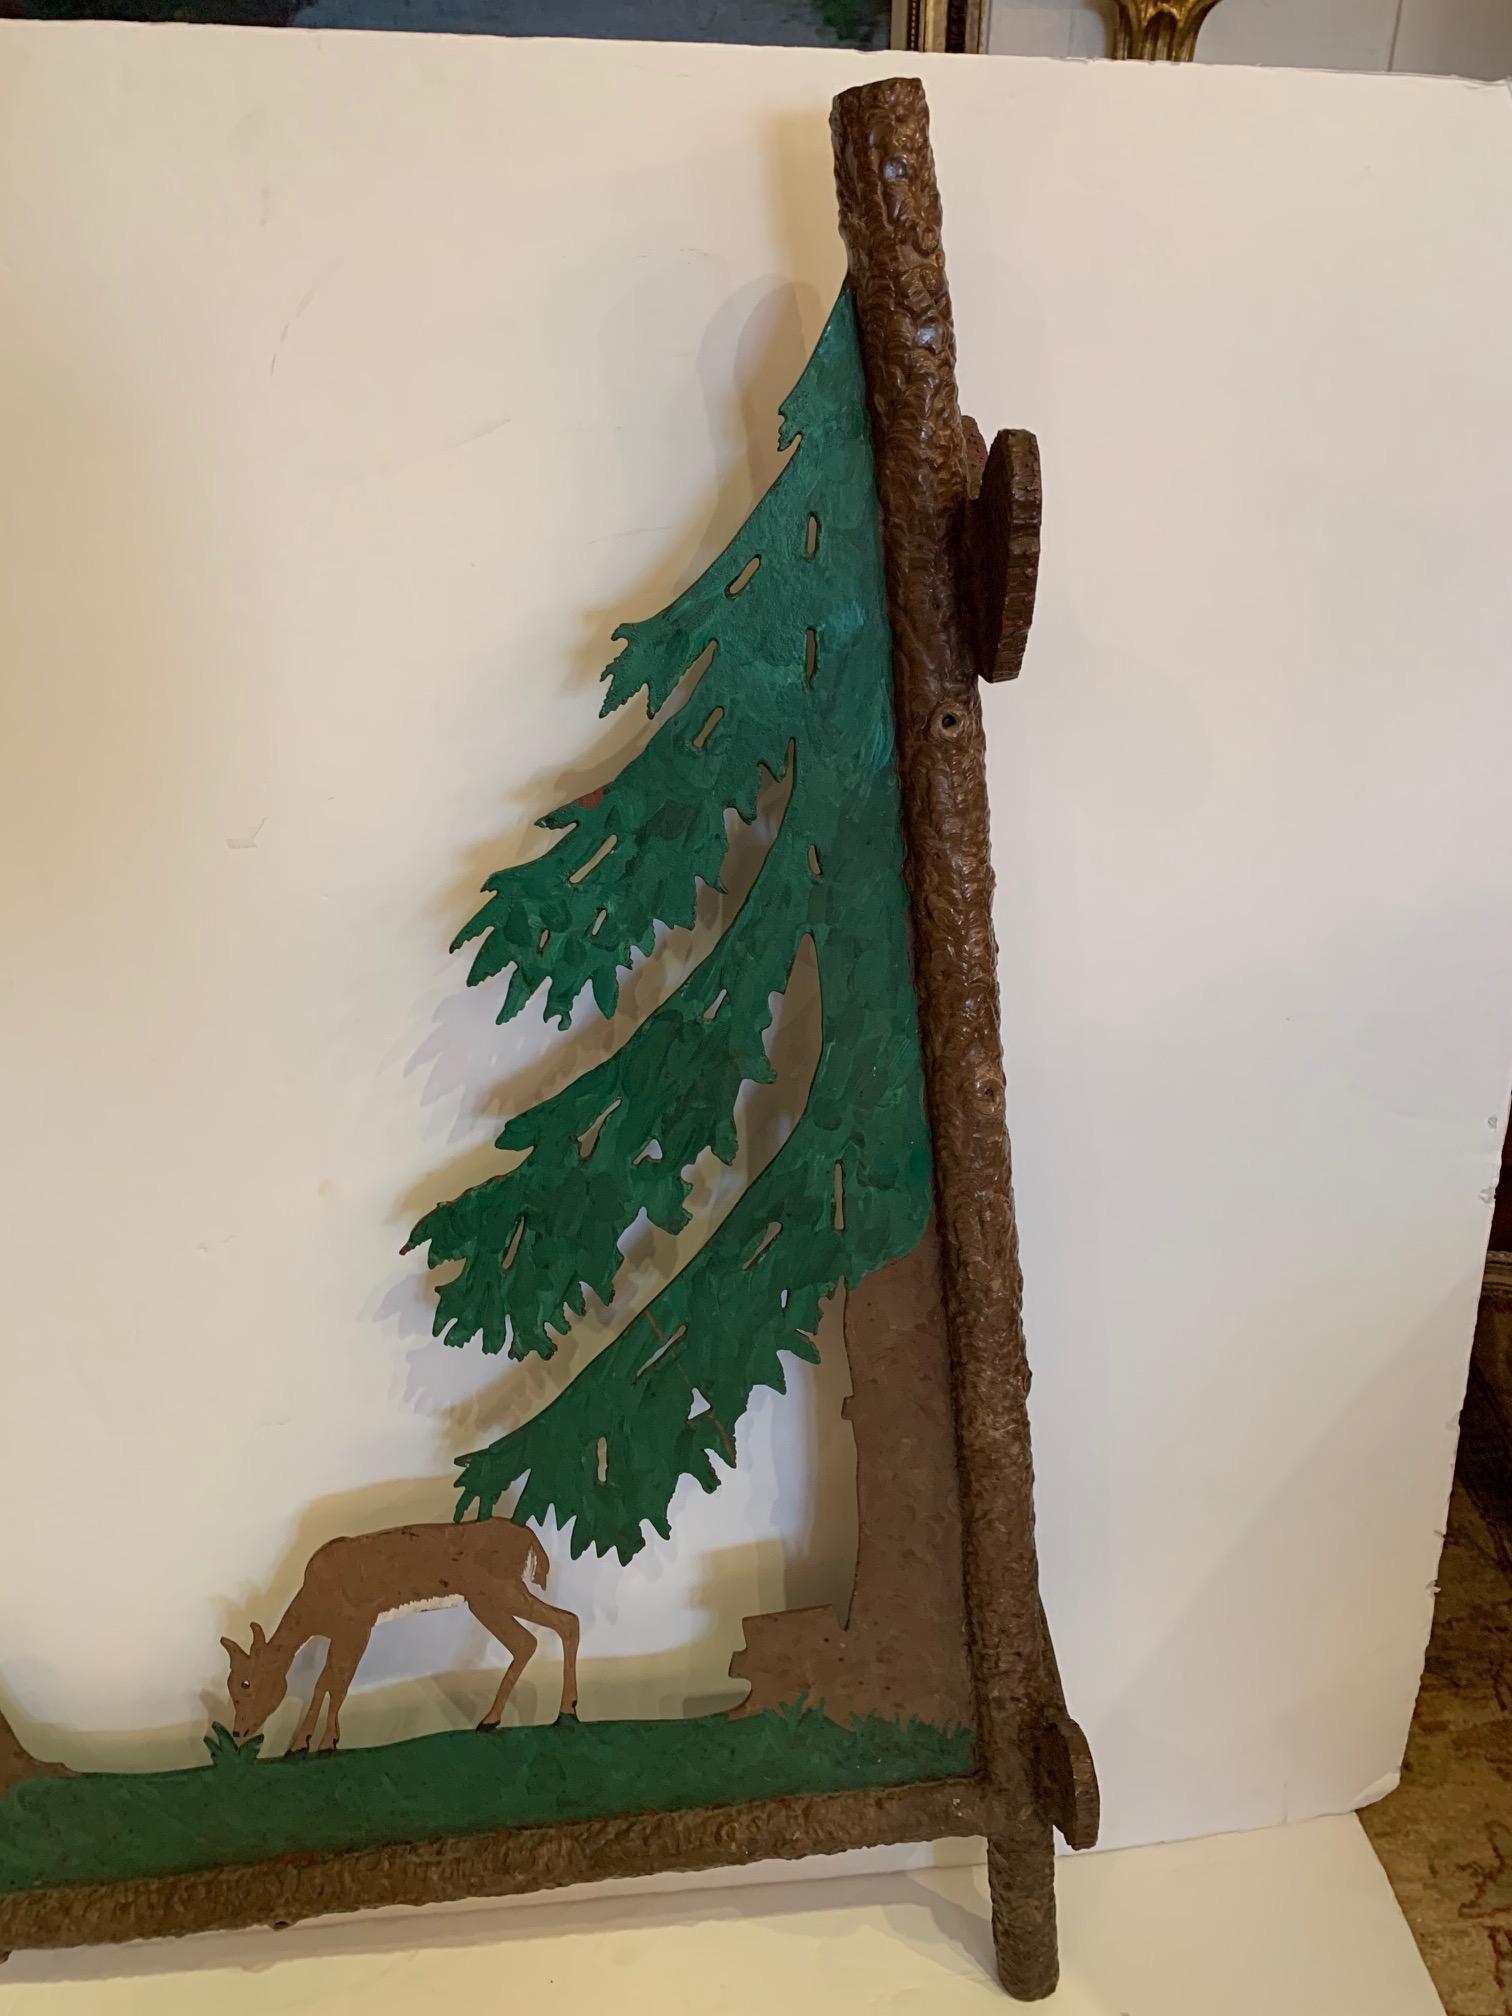 A rare find in a large found object sign, having heavy iron two sided painted decorative scene with evergreen and two bucolic deer.